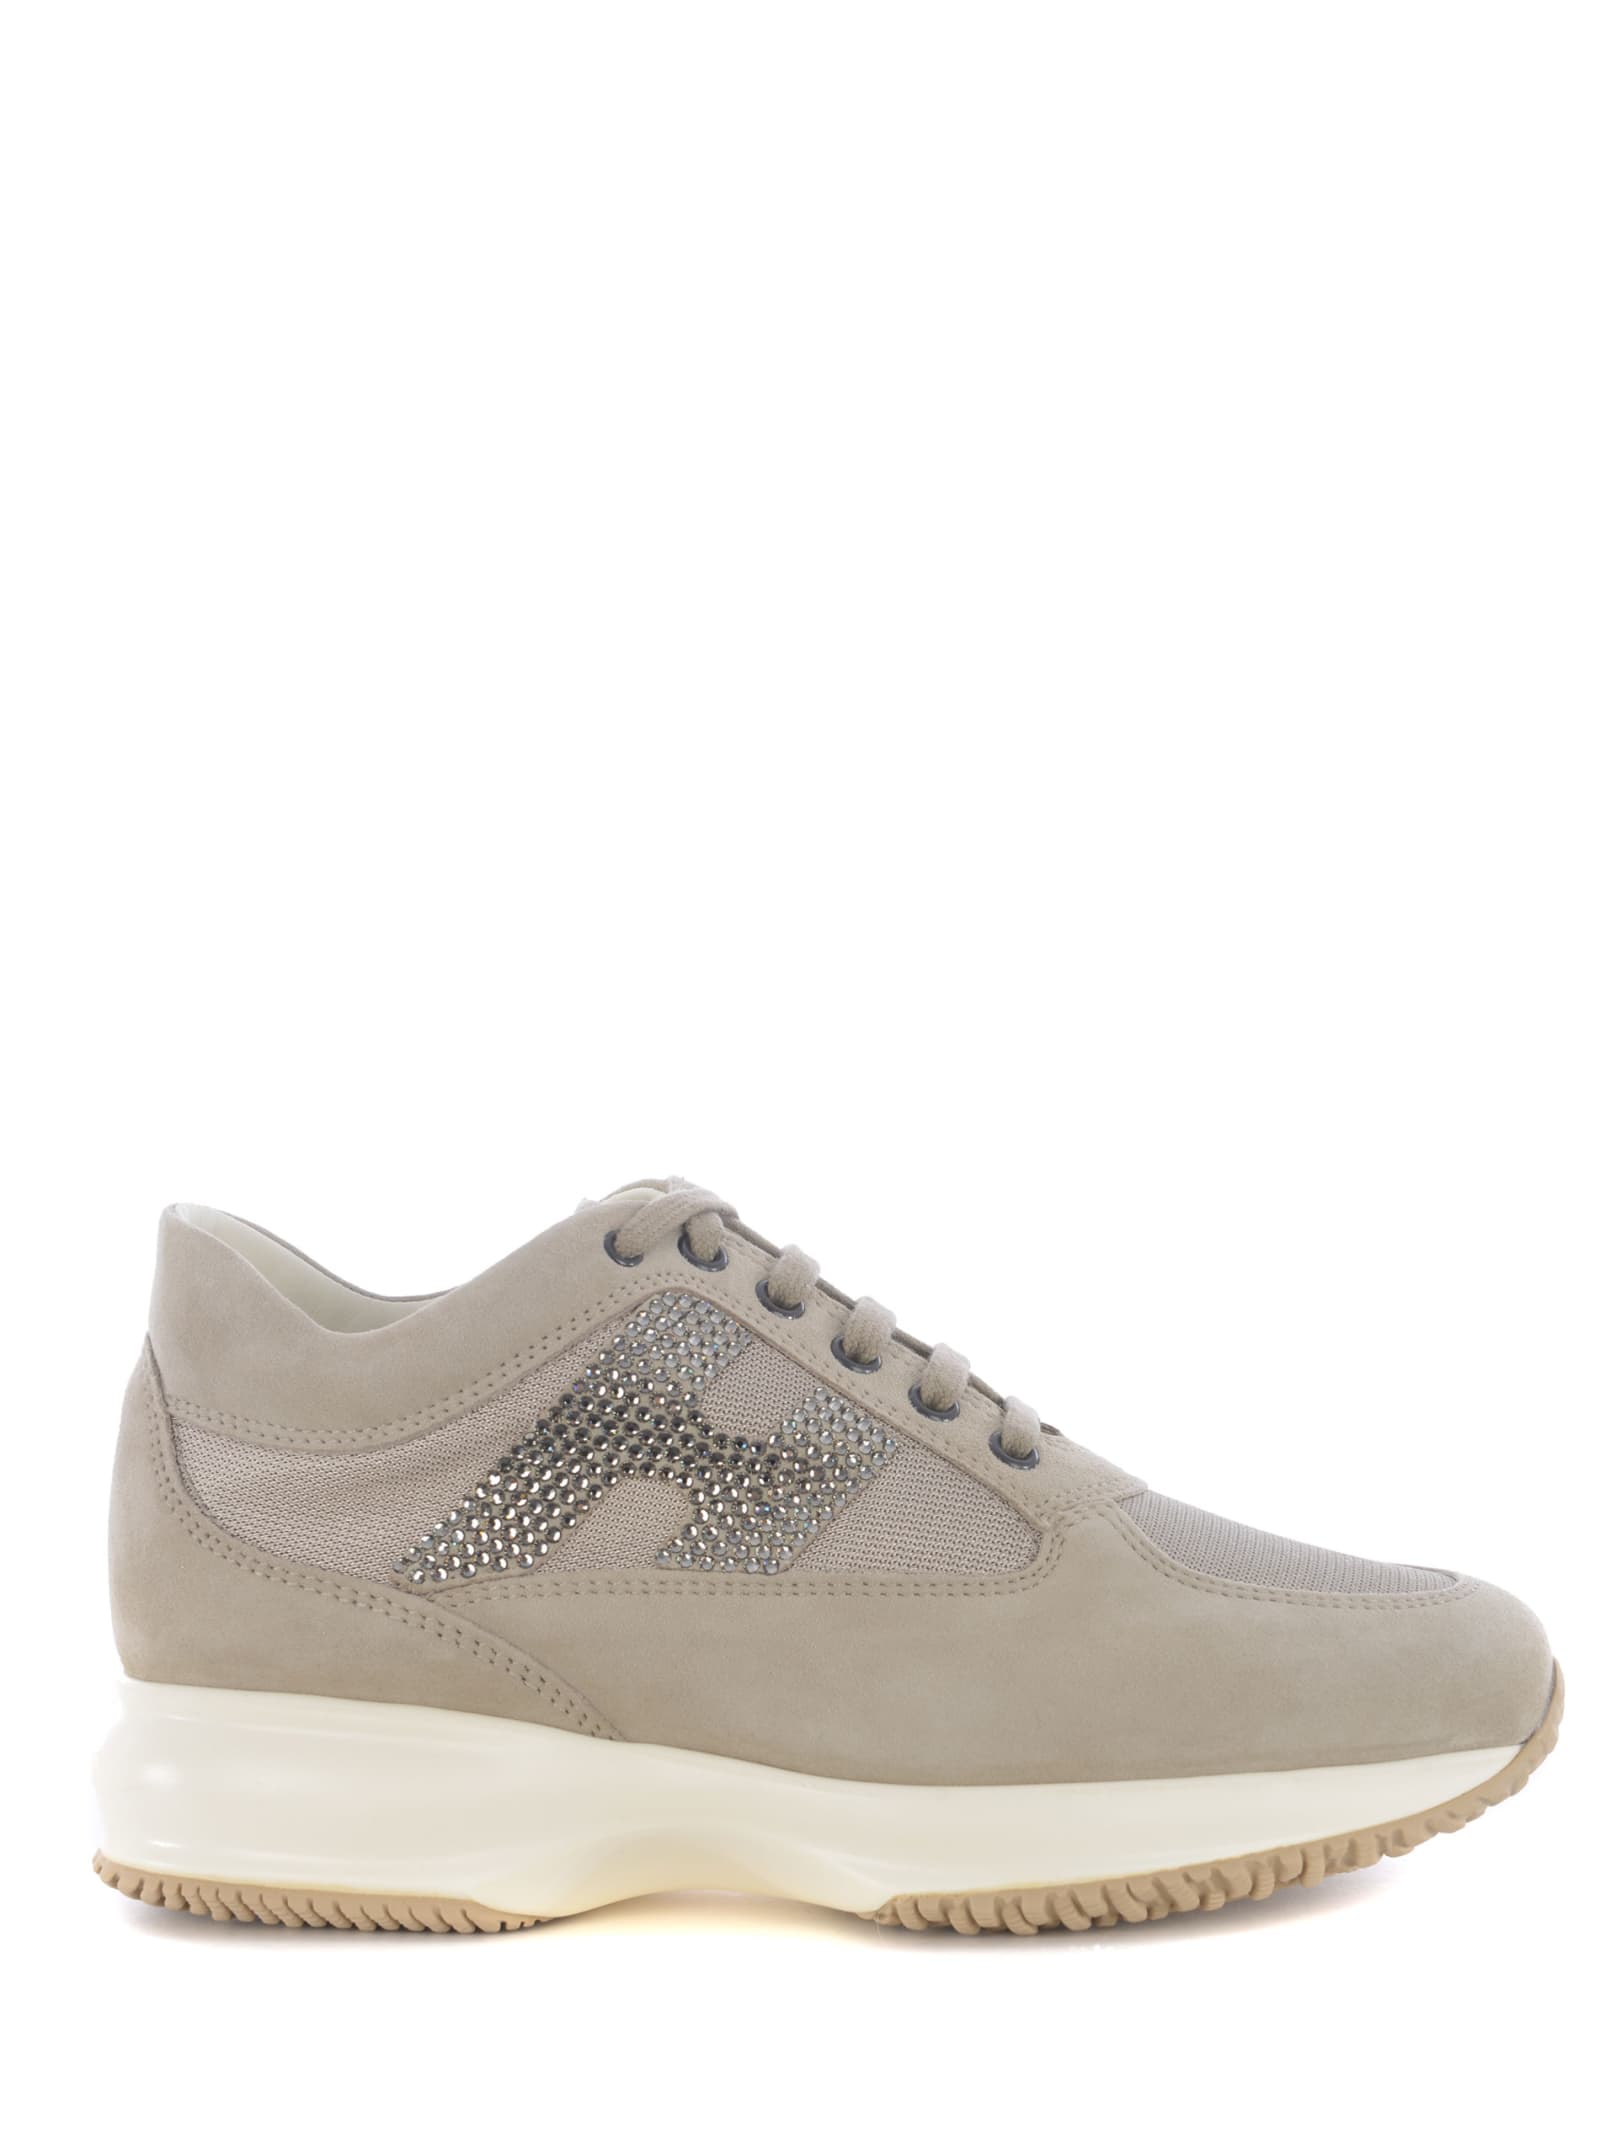 Hogan Interactive h Strass Womens Sneakers In Suede And Nylon